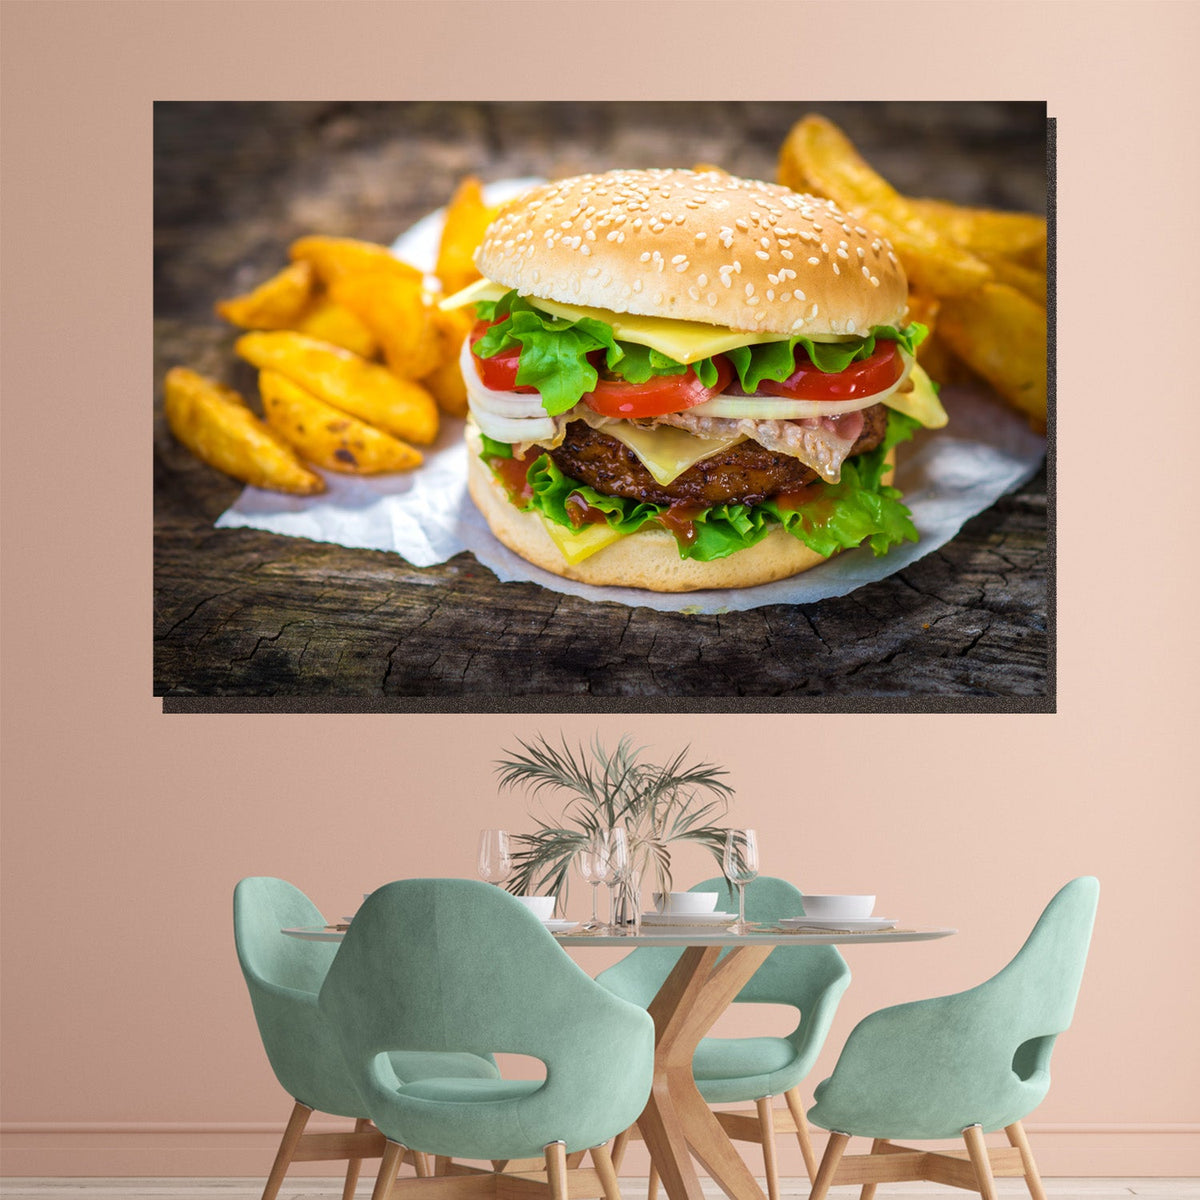 https://cdn.shopify.com/s/files/1/0387/9986/8044/products/BurgerwithpotatowedgesCanvasArtprintStretched-2.jpg